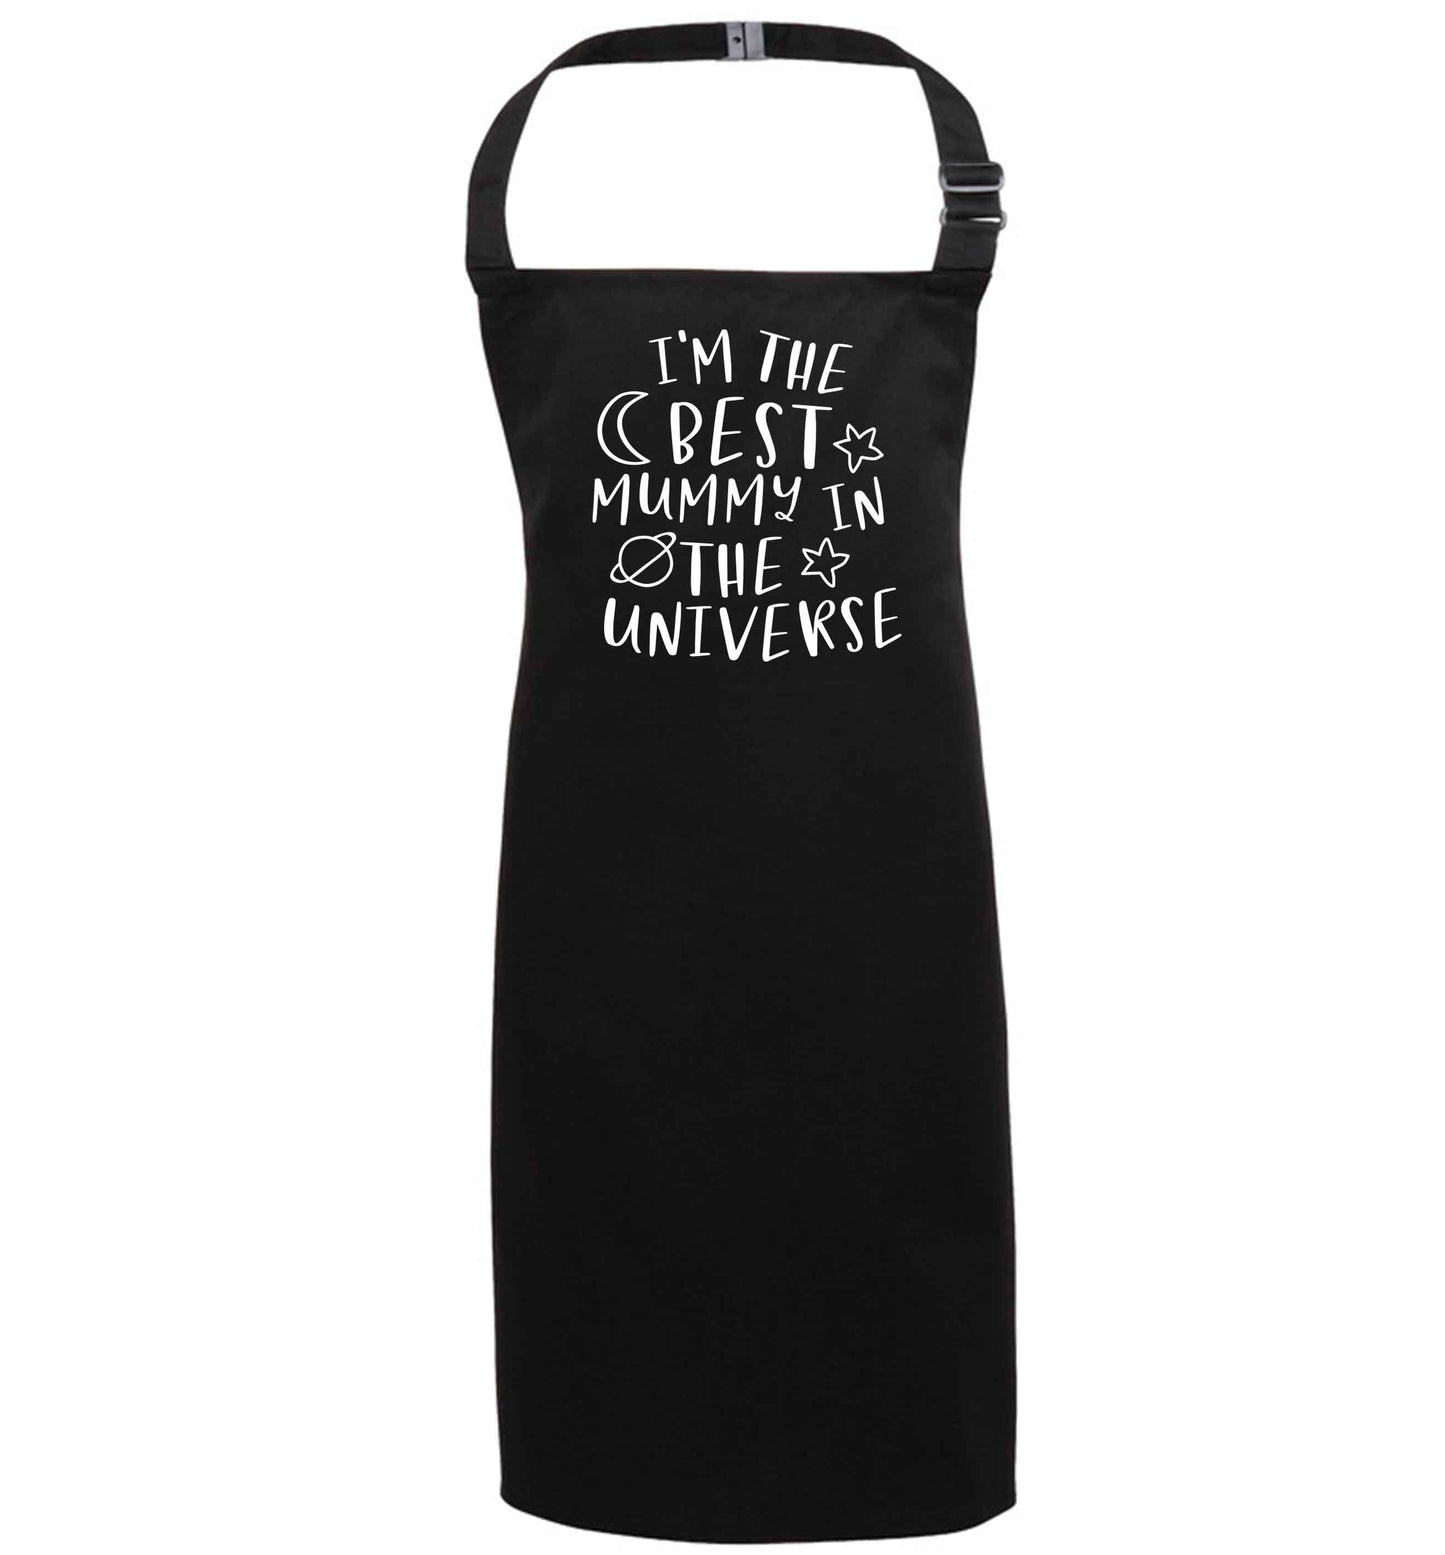 I'm the best mummy in the universe black apron 7-10 years